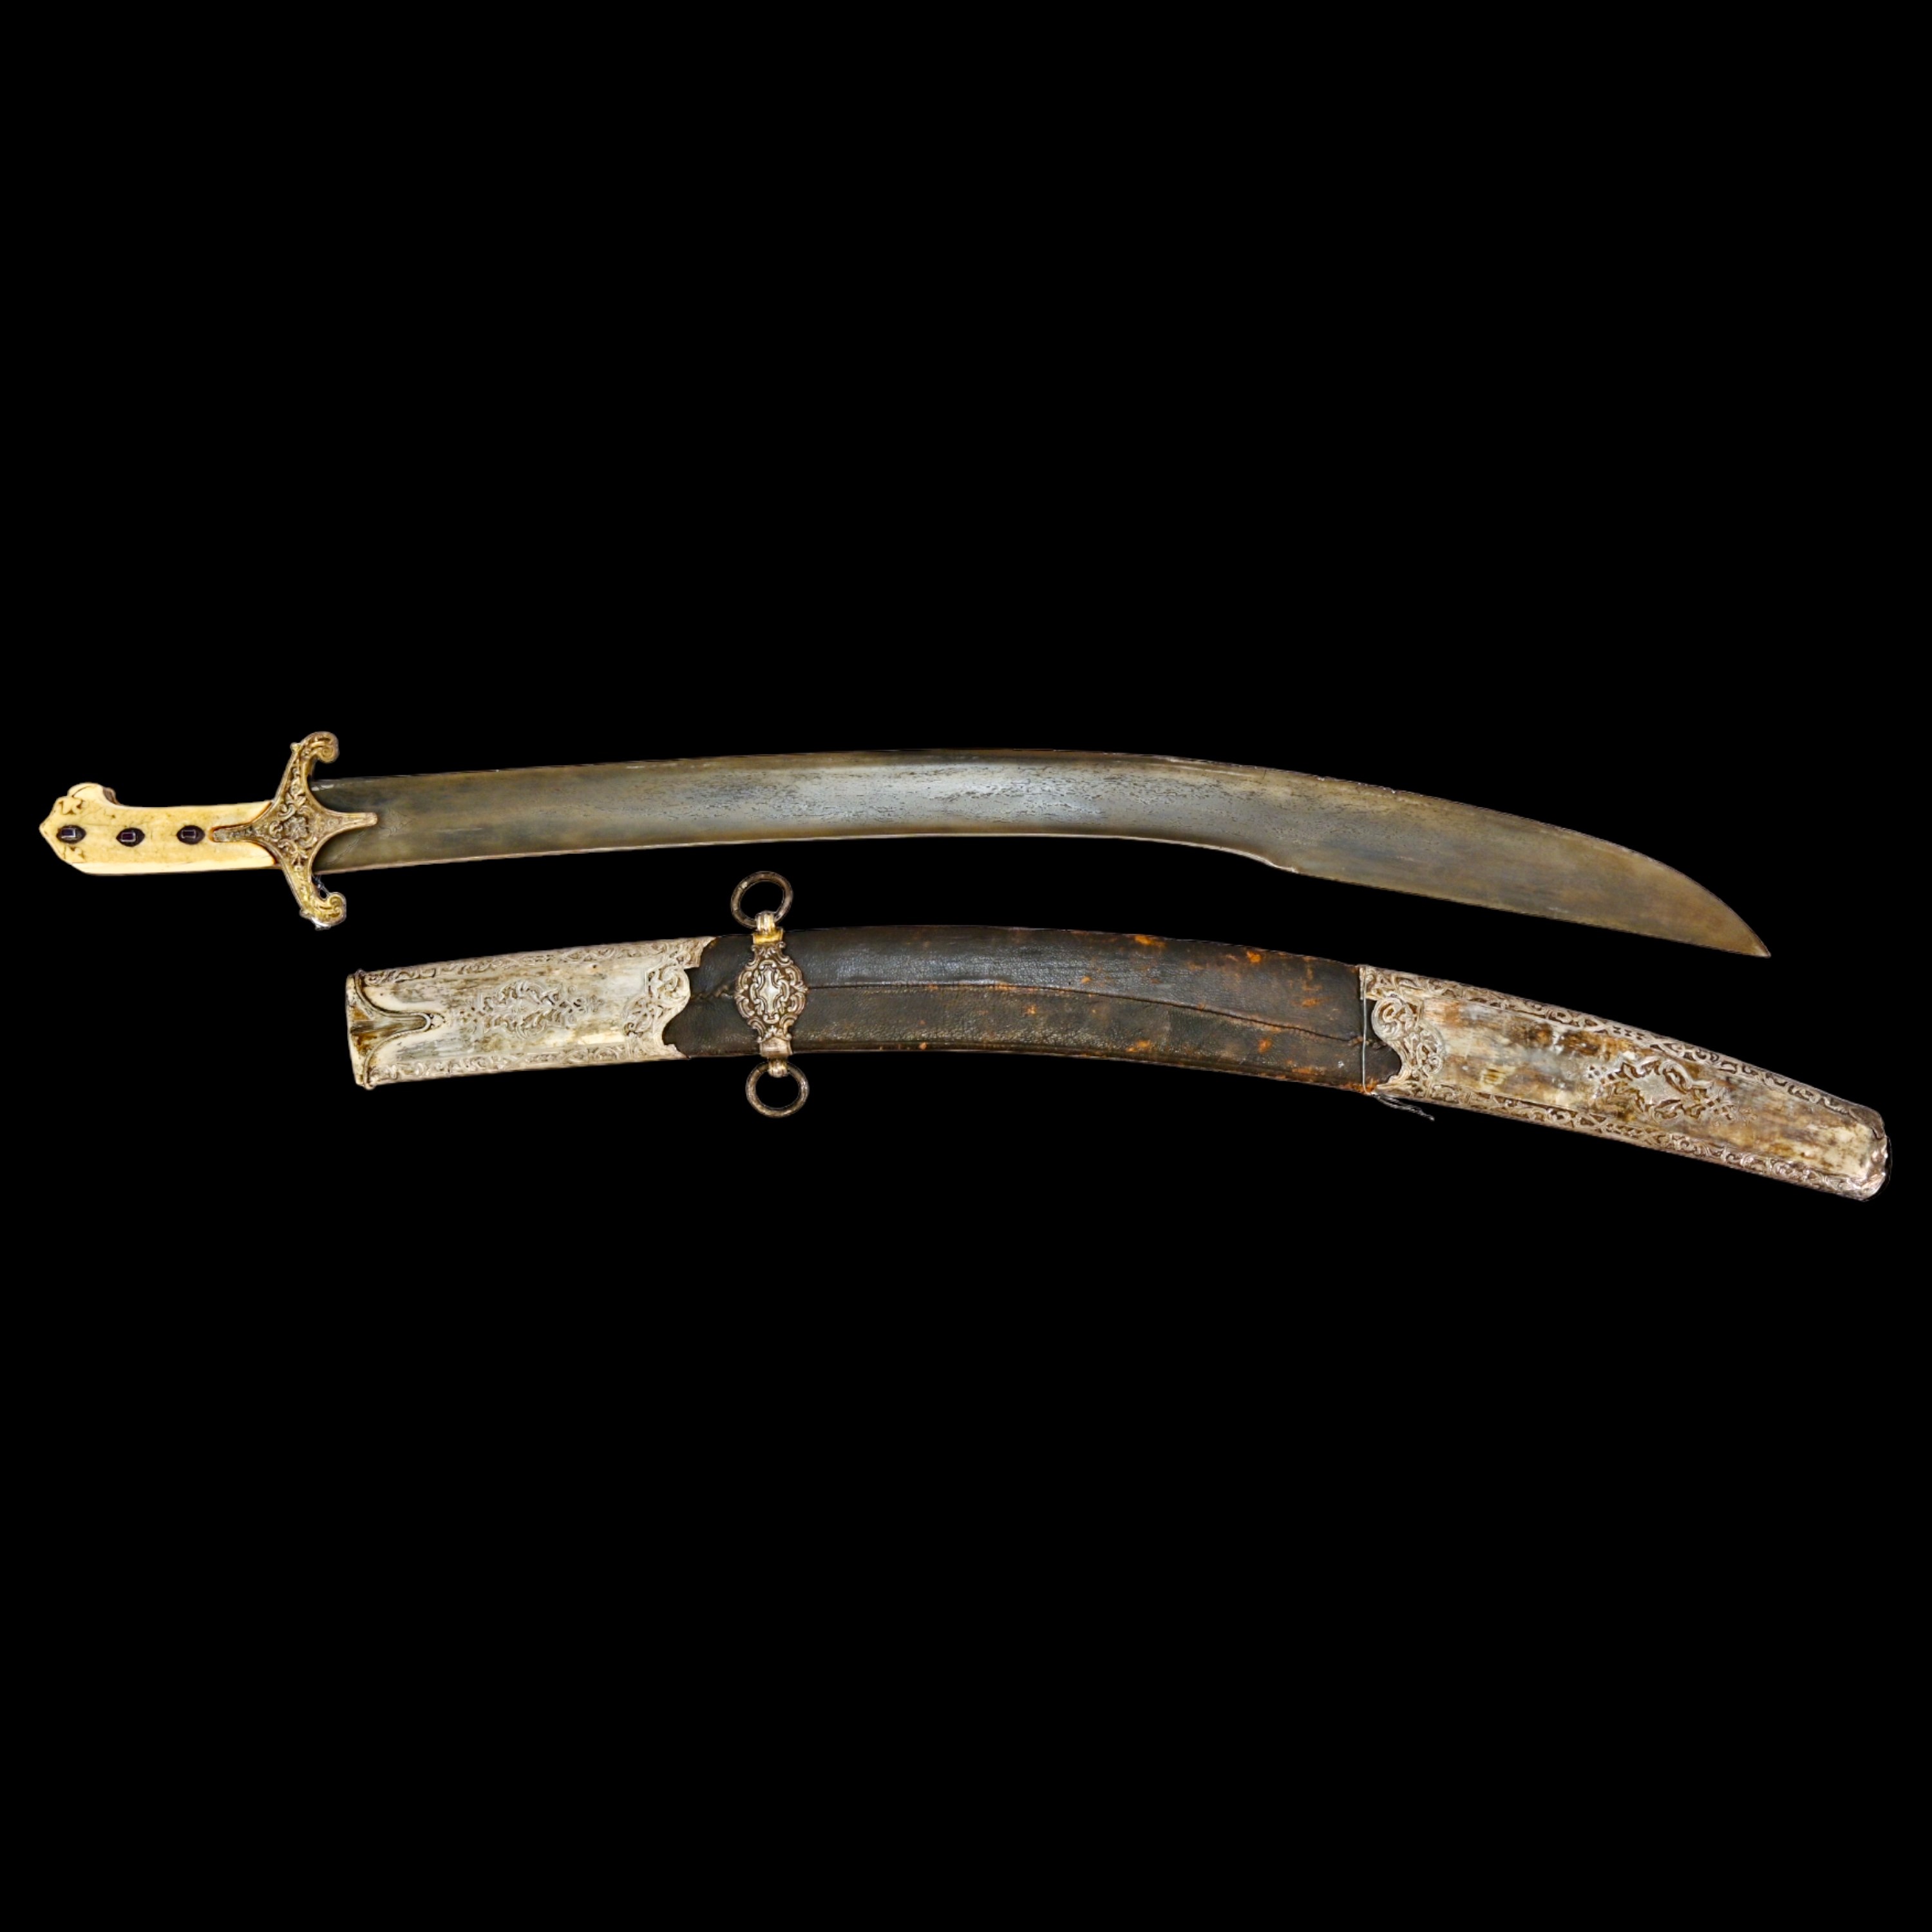 Rare Ottoman saber KARABELA, wootz blade, silver with the tugra of Sultan Ahmed III, early 18th C. - Image 19 of 27